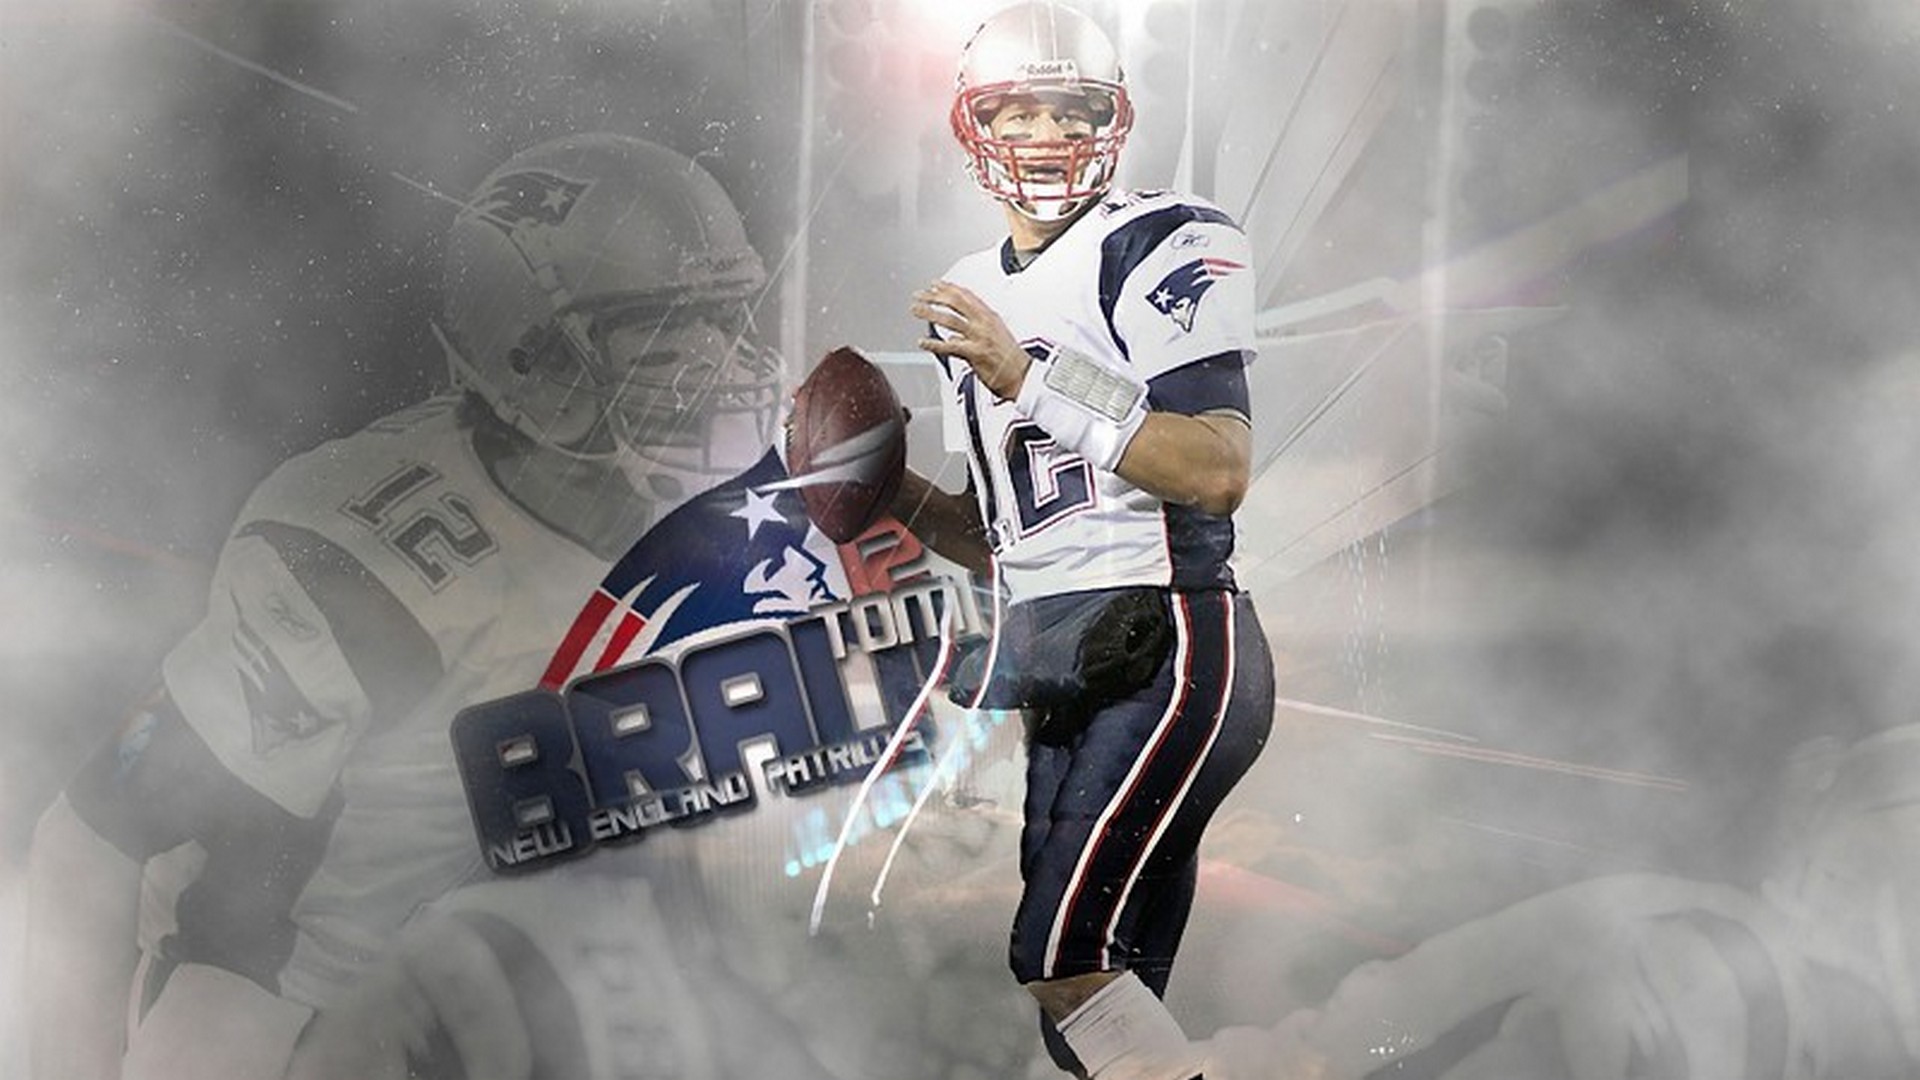 Tom Brady Patriots Desktop Wallpaper with resolution 1920X1080 pixel. You can use this wallpaper as background for your desktop Computer Screensavers, Android or iPhone smartphones